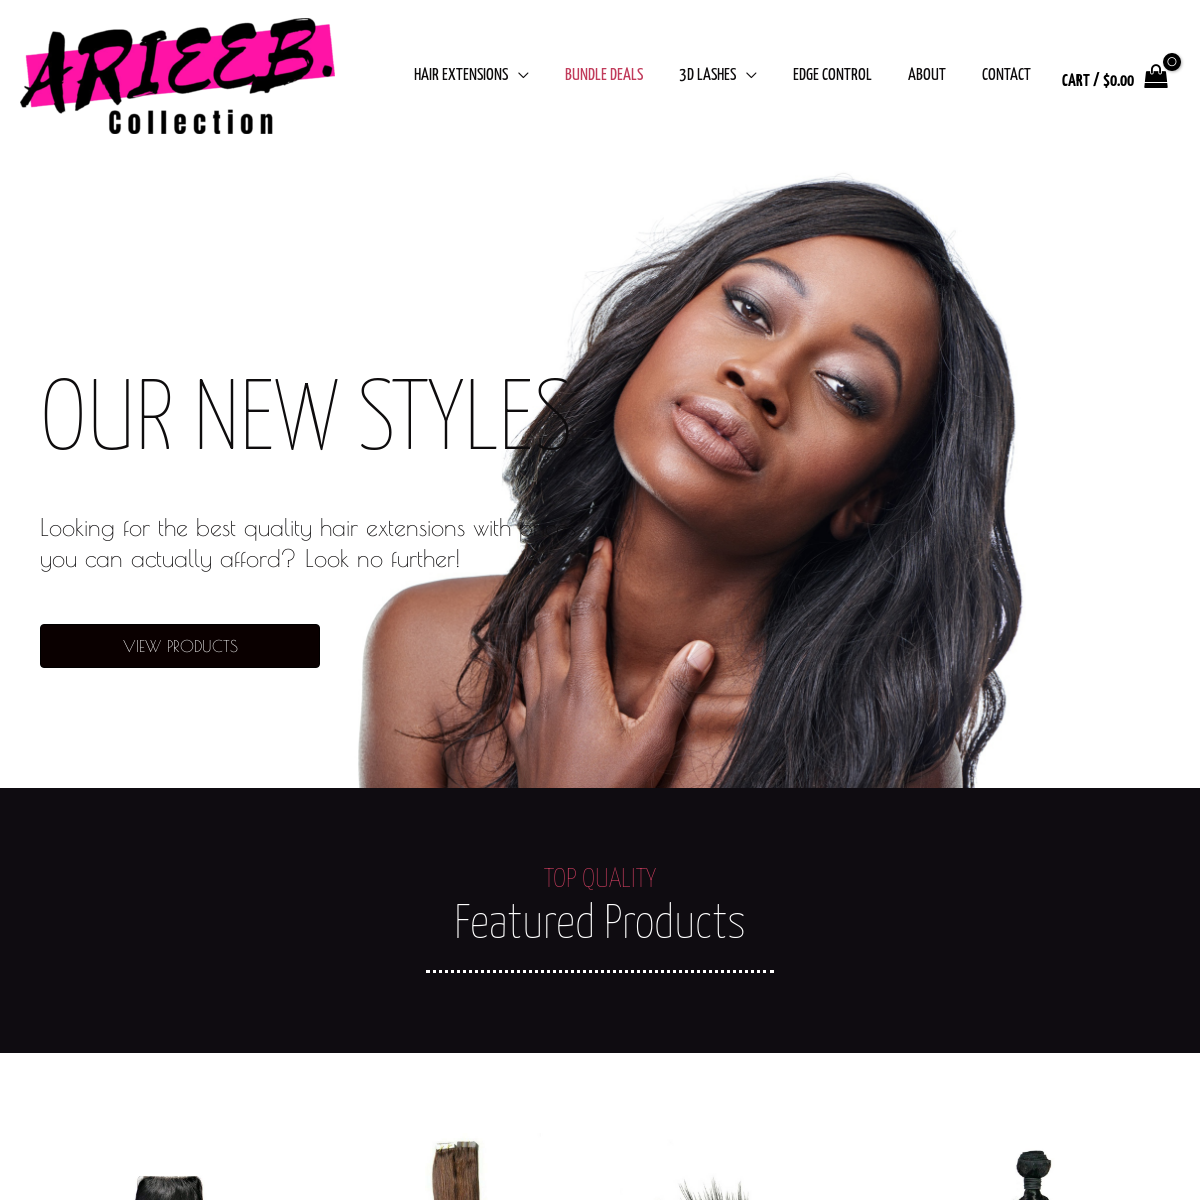 A complete backup of arieebcollection.com